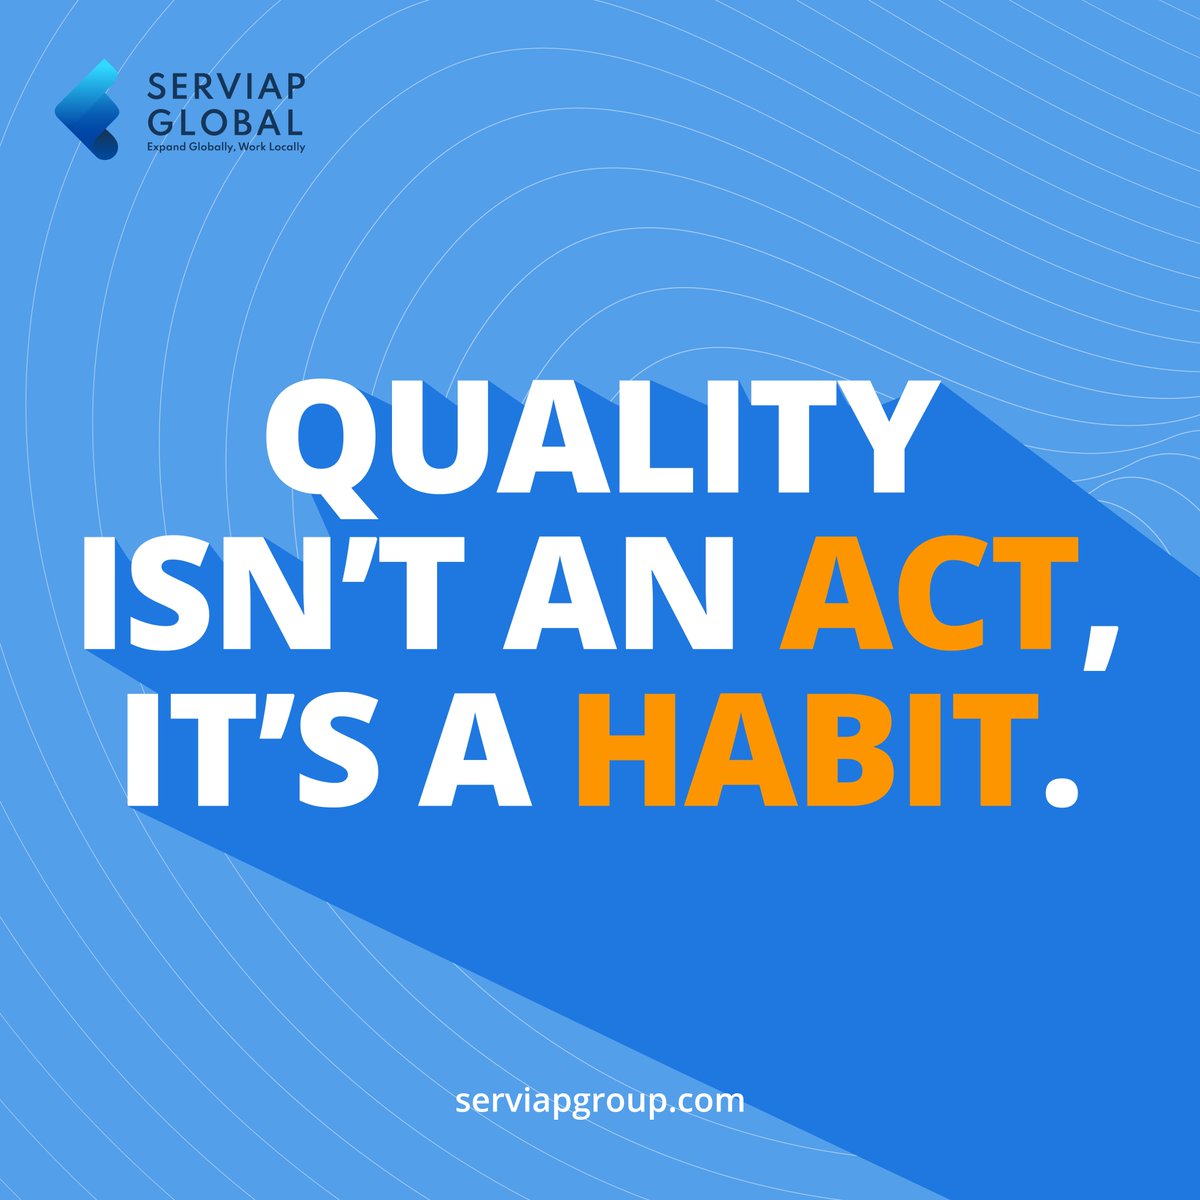 Your work is a reflection of your habits. Make sure they're good ones. 

#workhabits #qualitywork